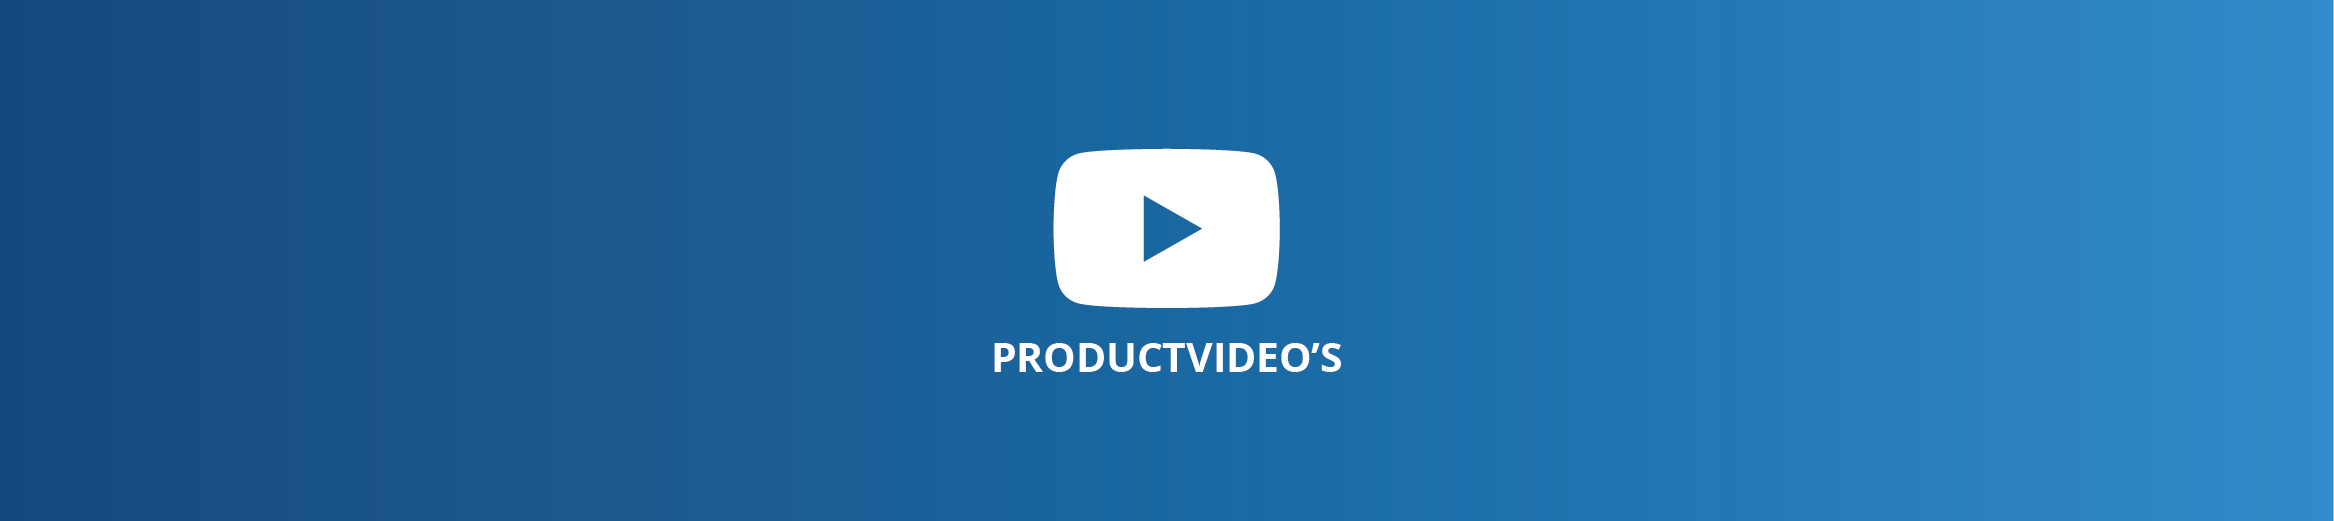 Productvideo's